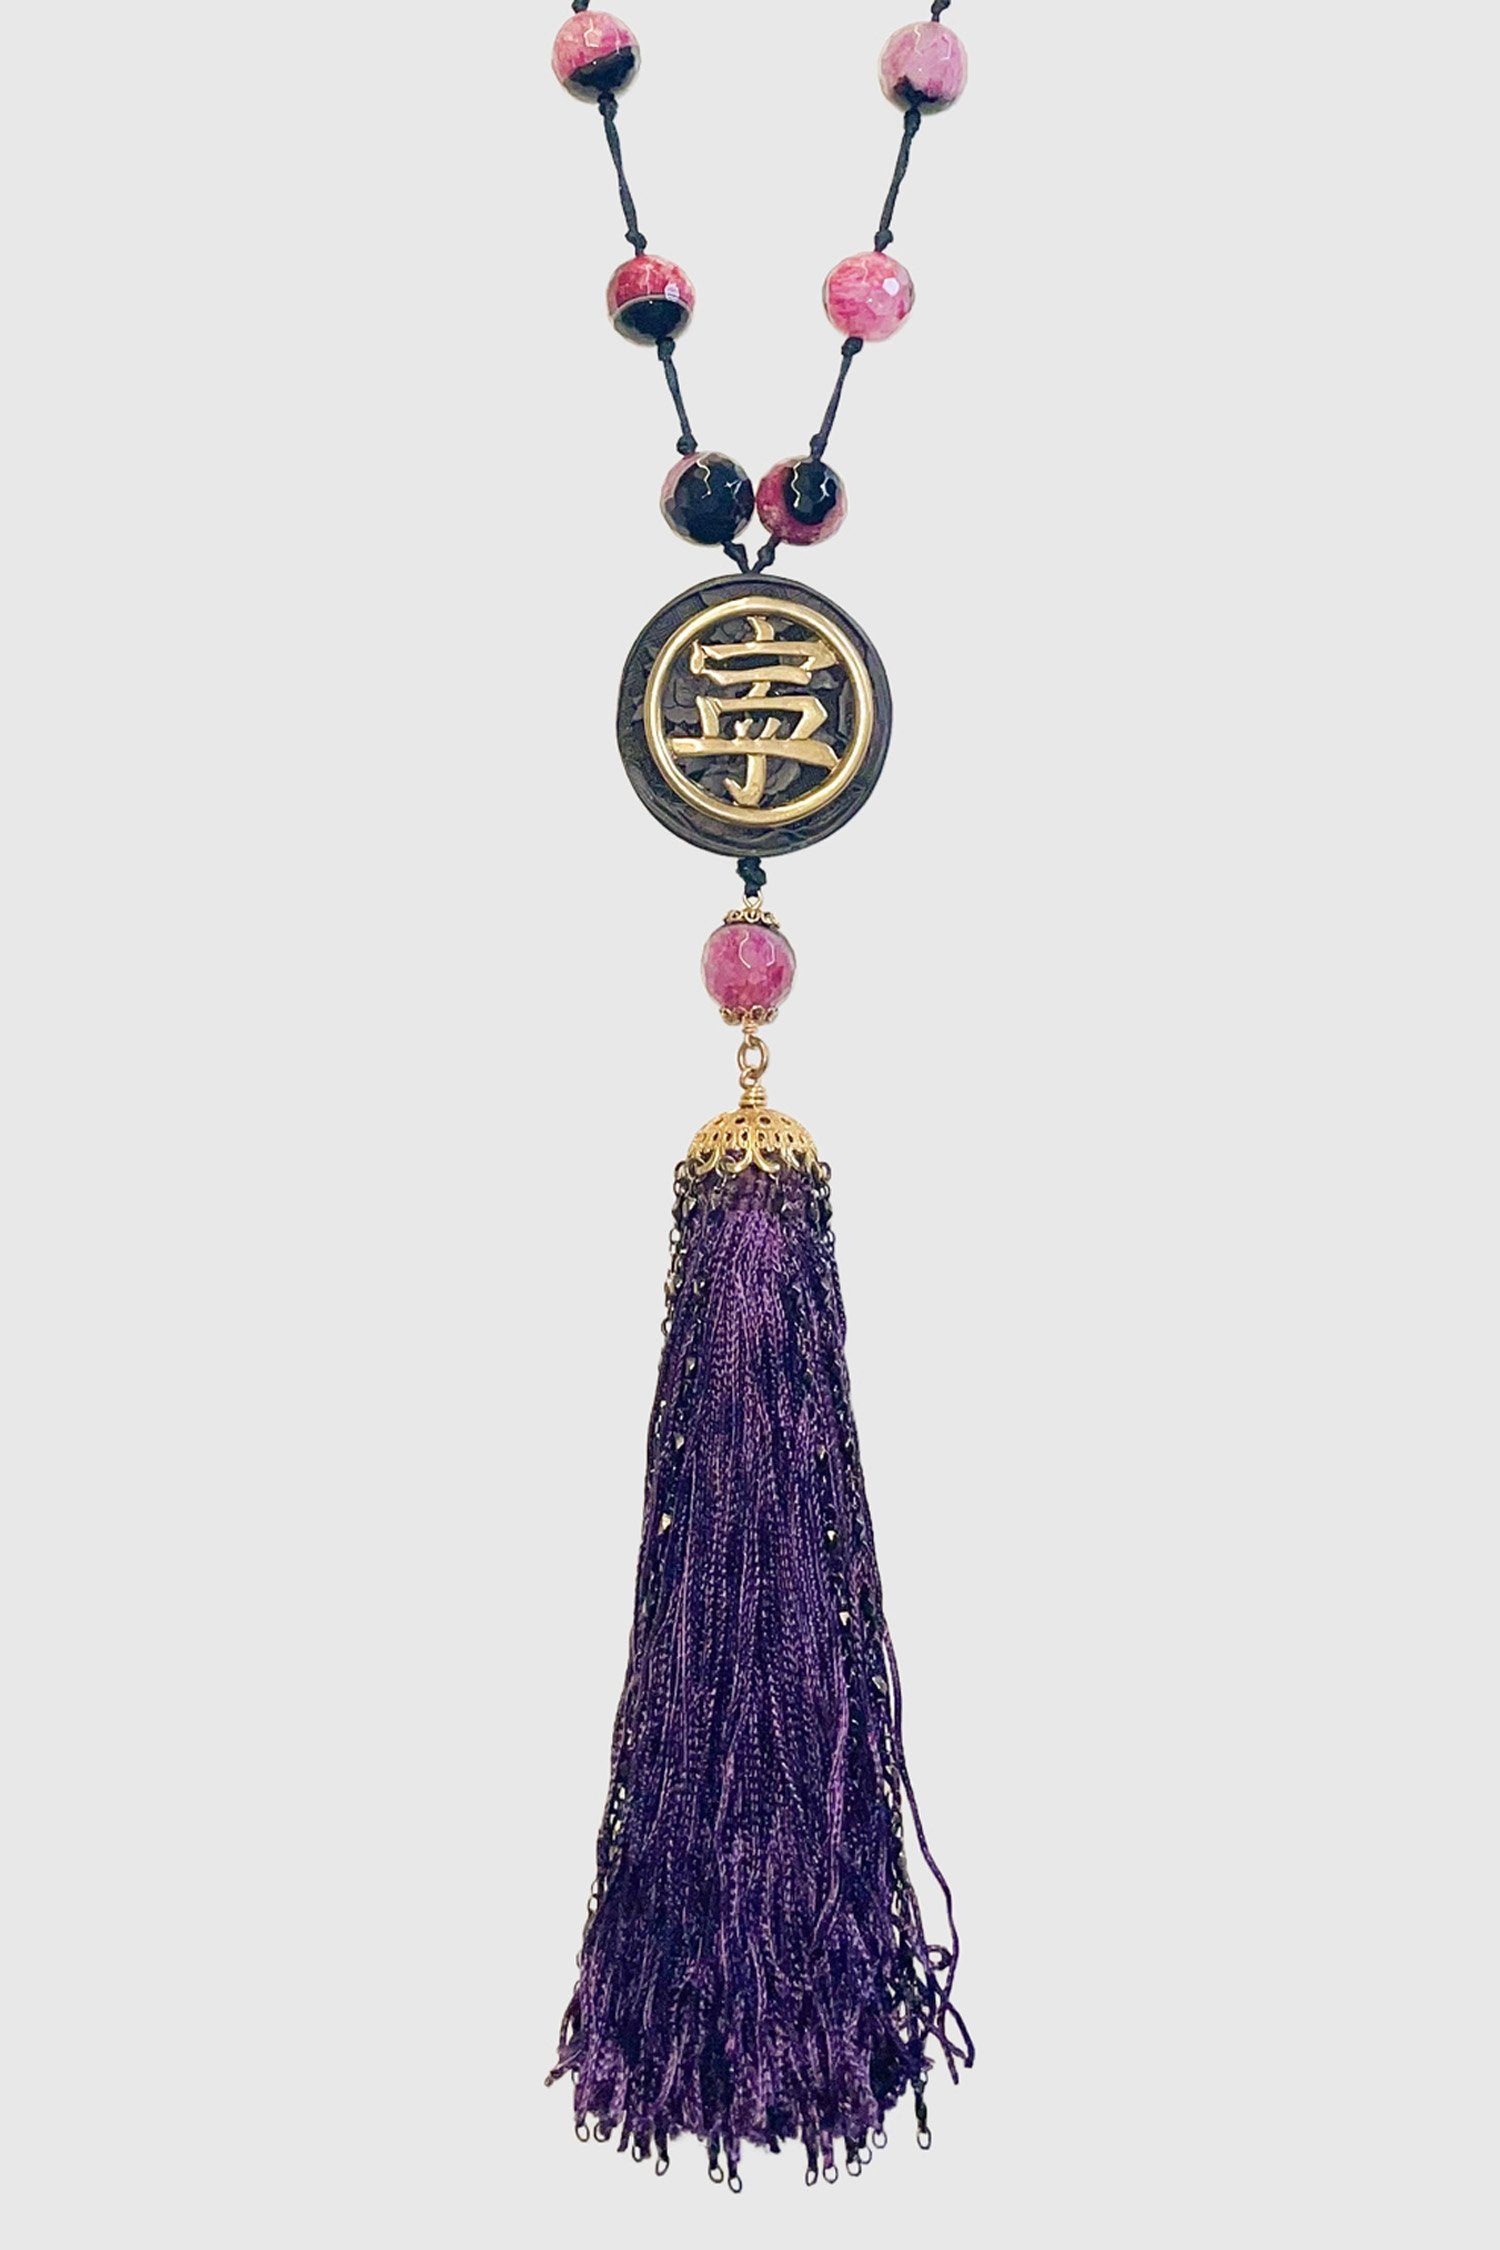 Look 32 Necklace, colored pink beads, round dark wood badge with Chinese fonts, Tassel hue of purple beads